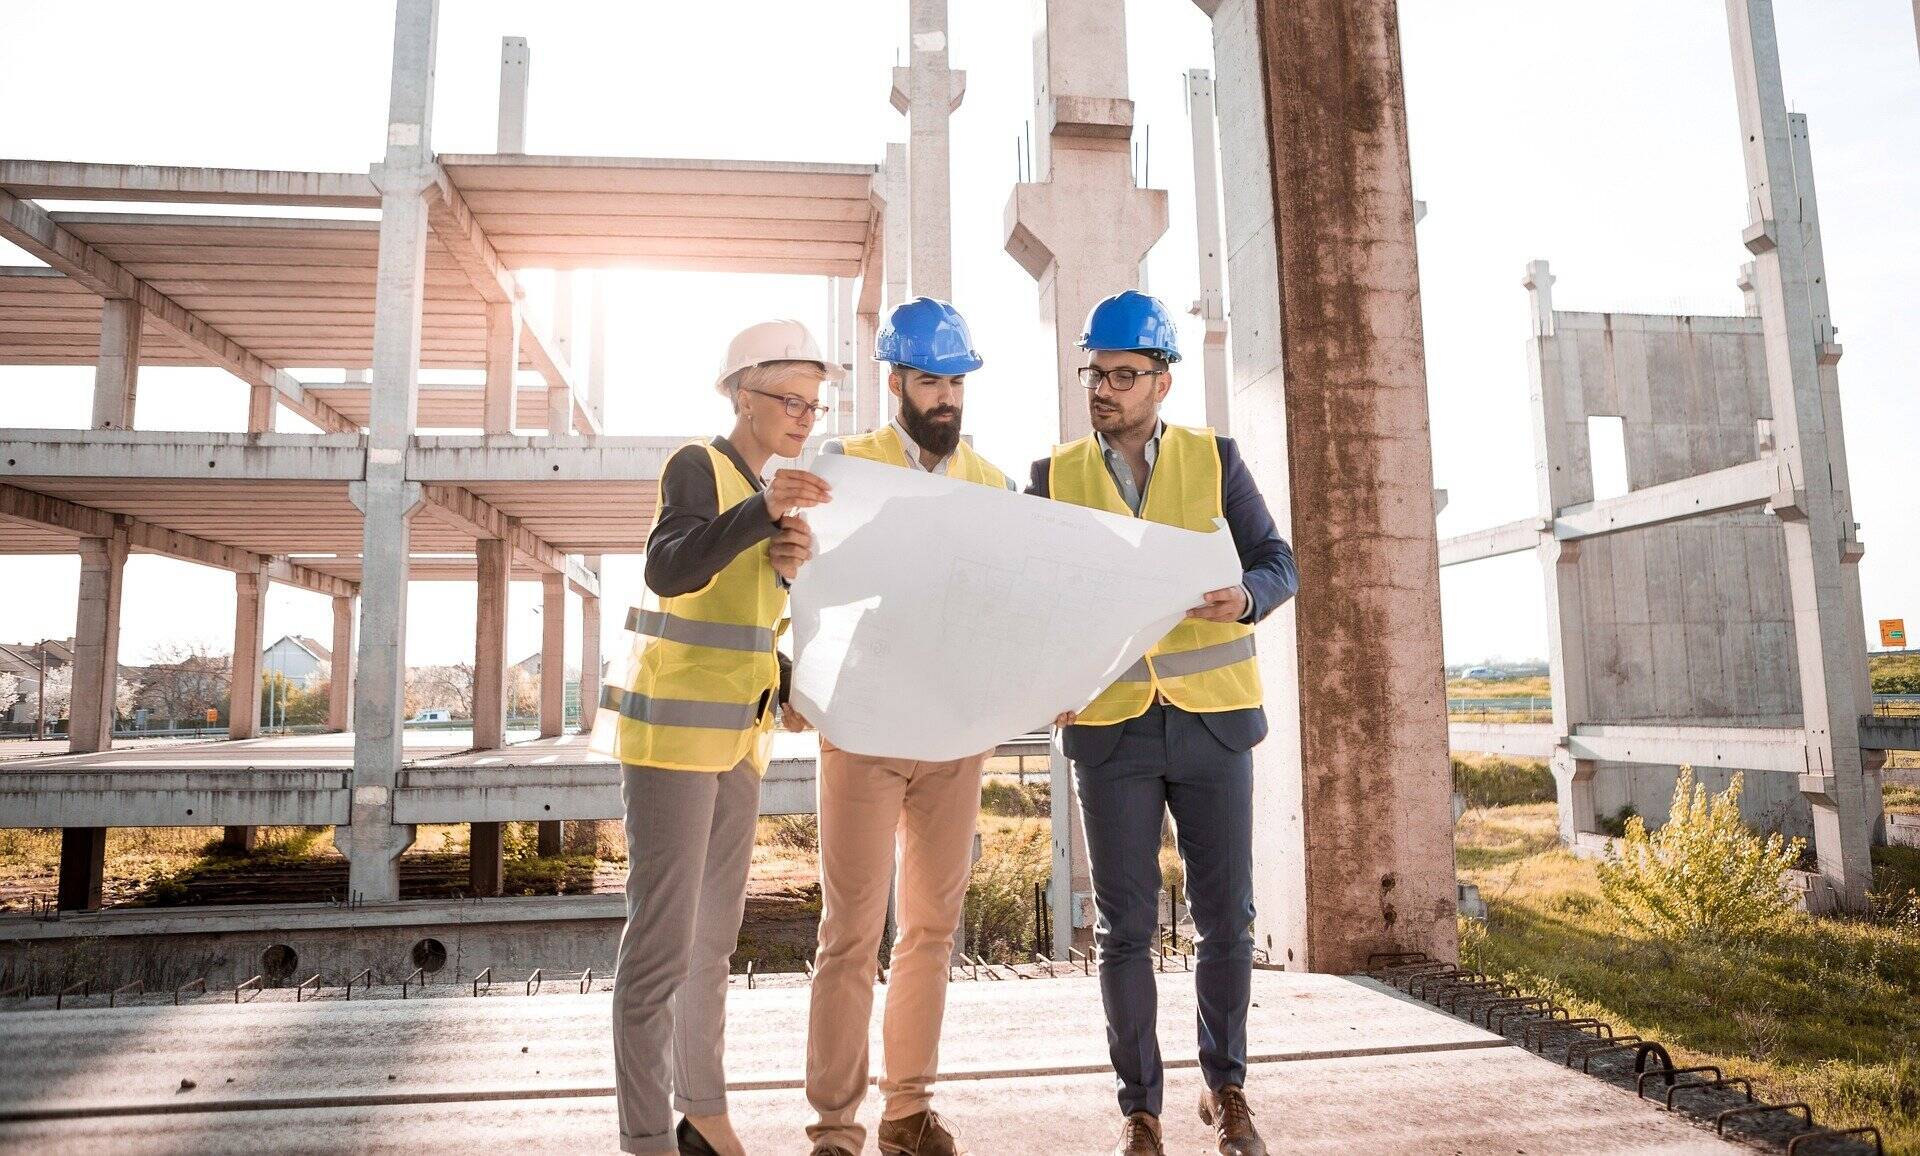 Three construction workers looking at a blueprint at a construction site.